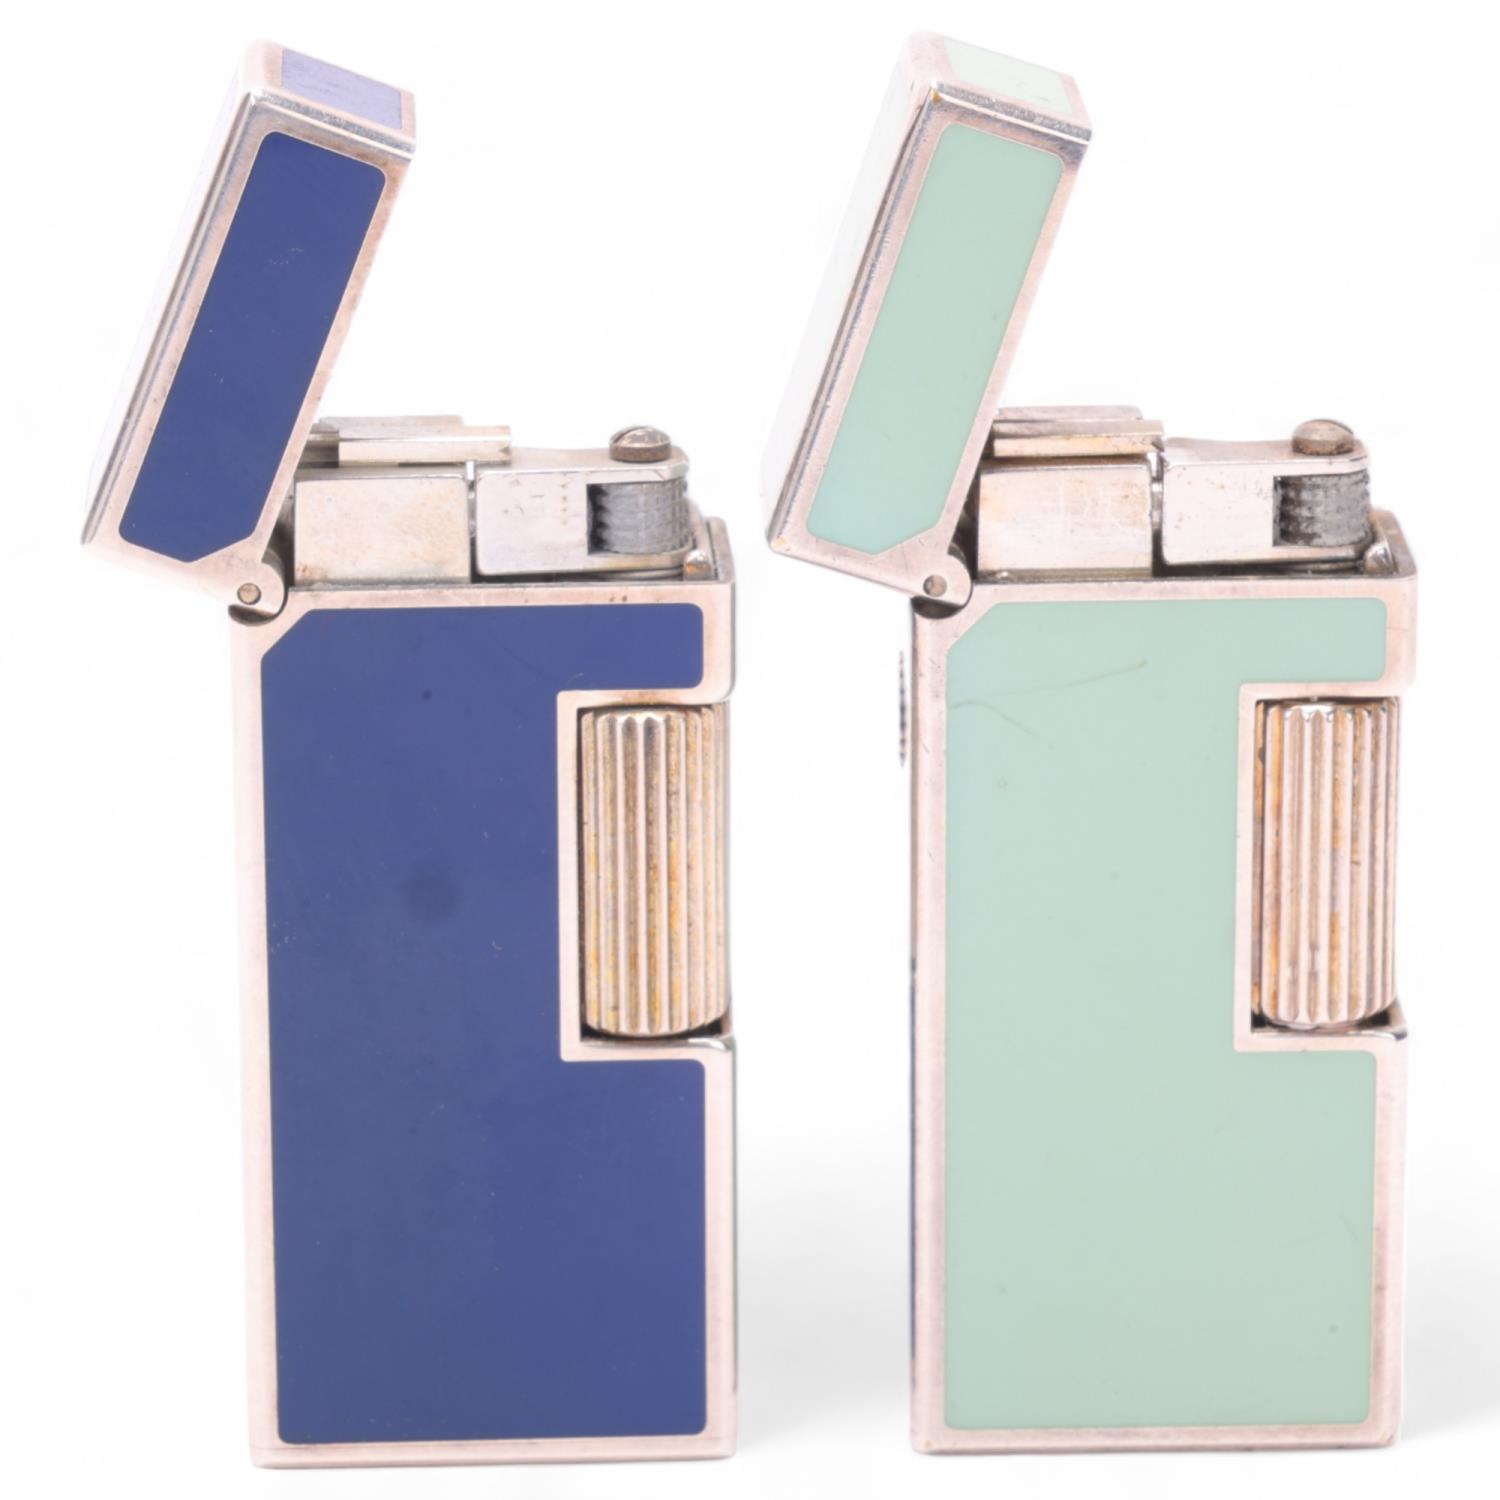 2 vintage Dunhill Rollagas lighters, with blue and aqua lacquer bodies, makers marks to base, No